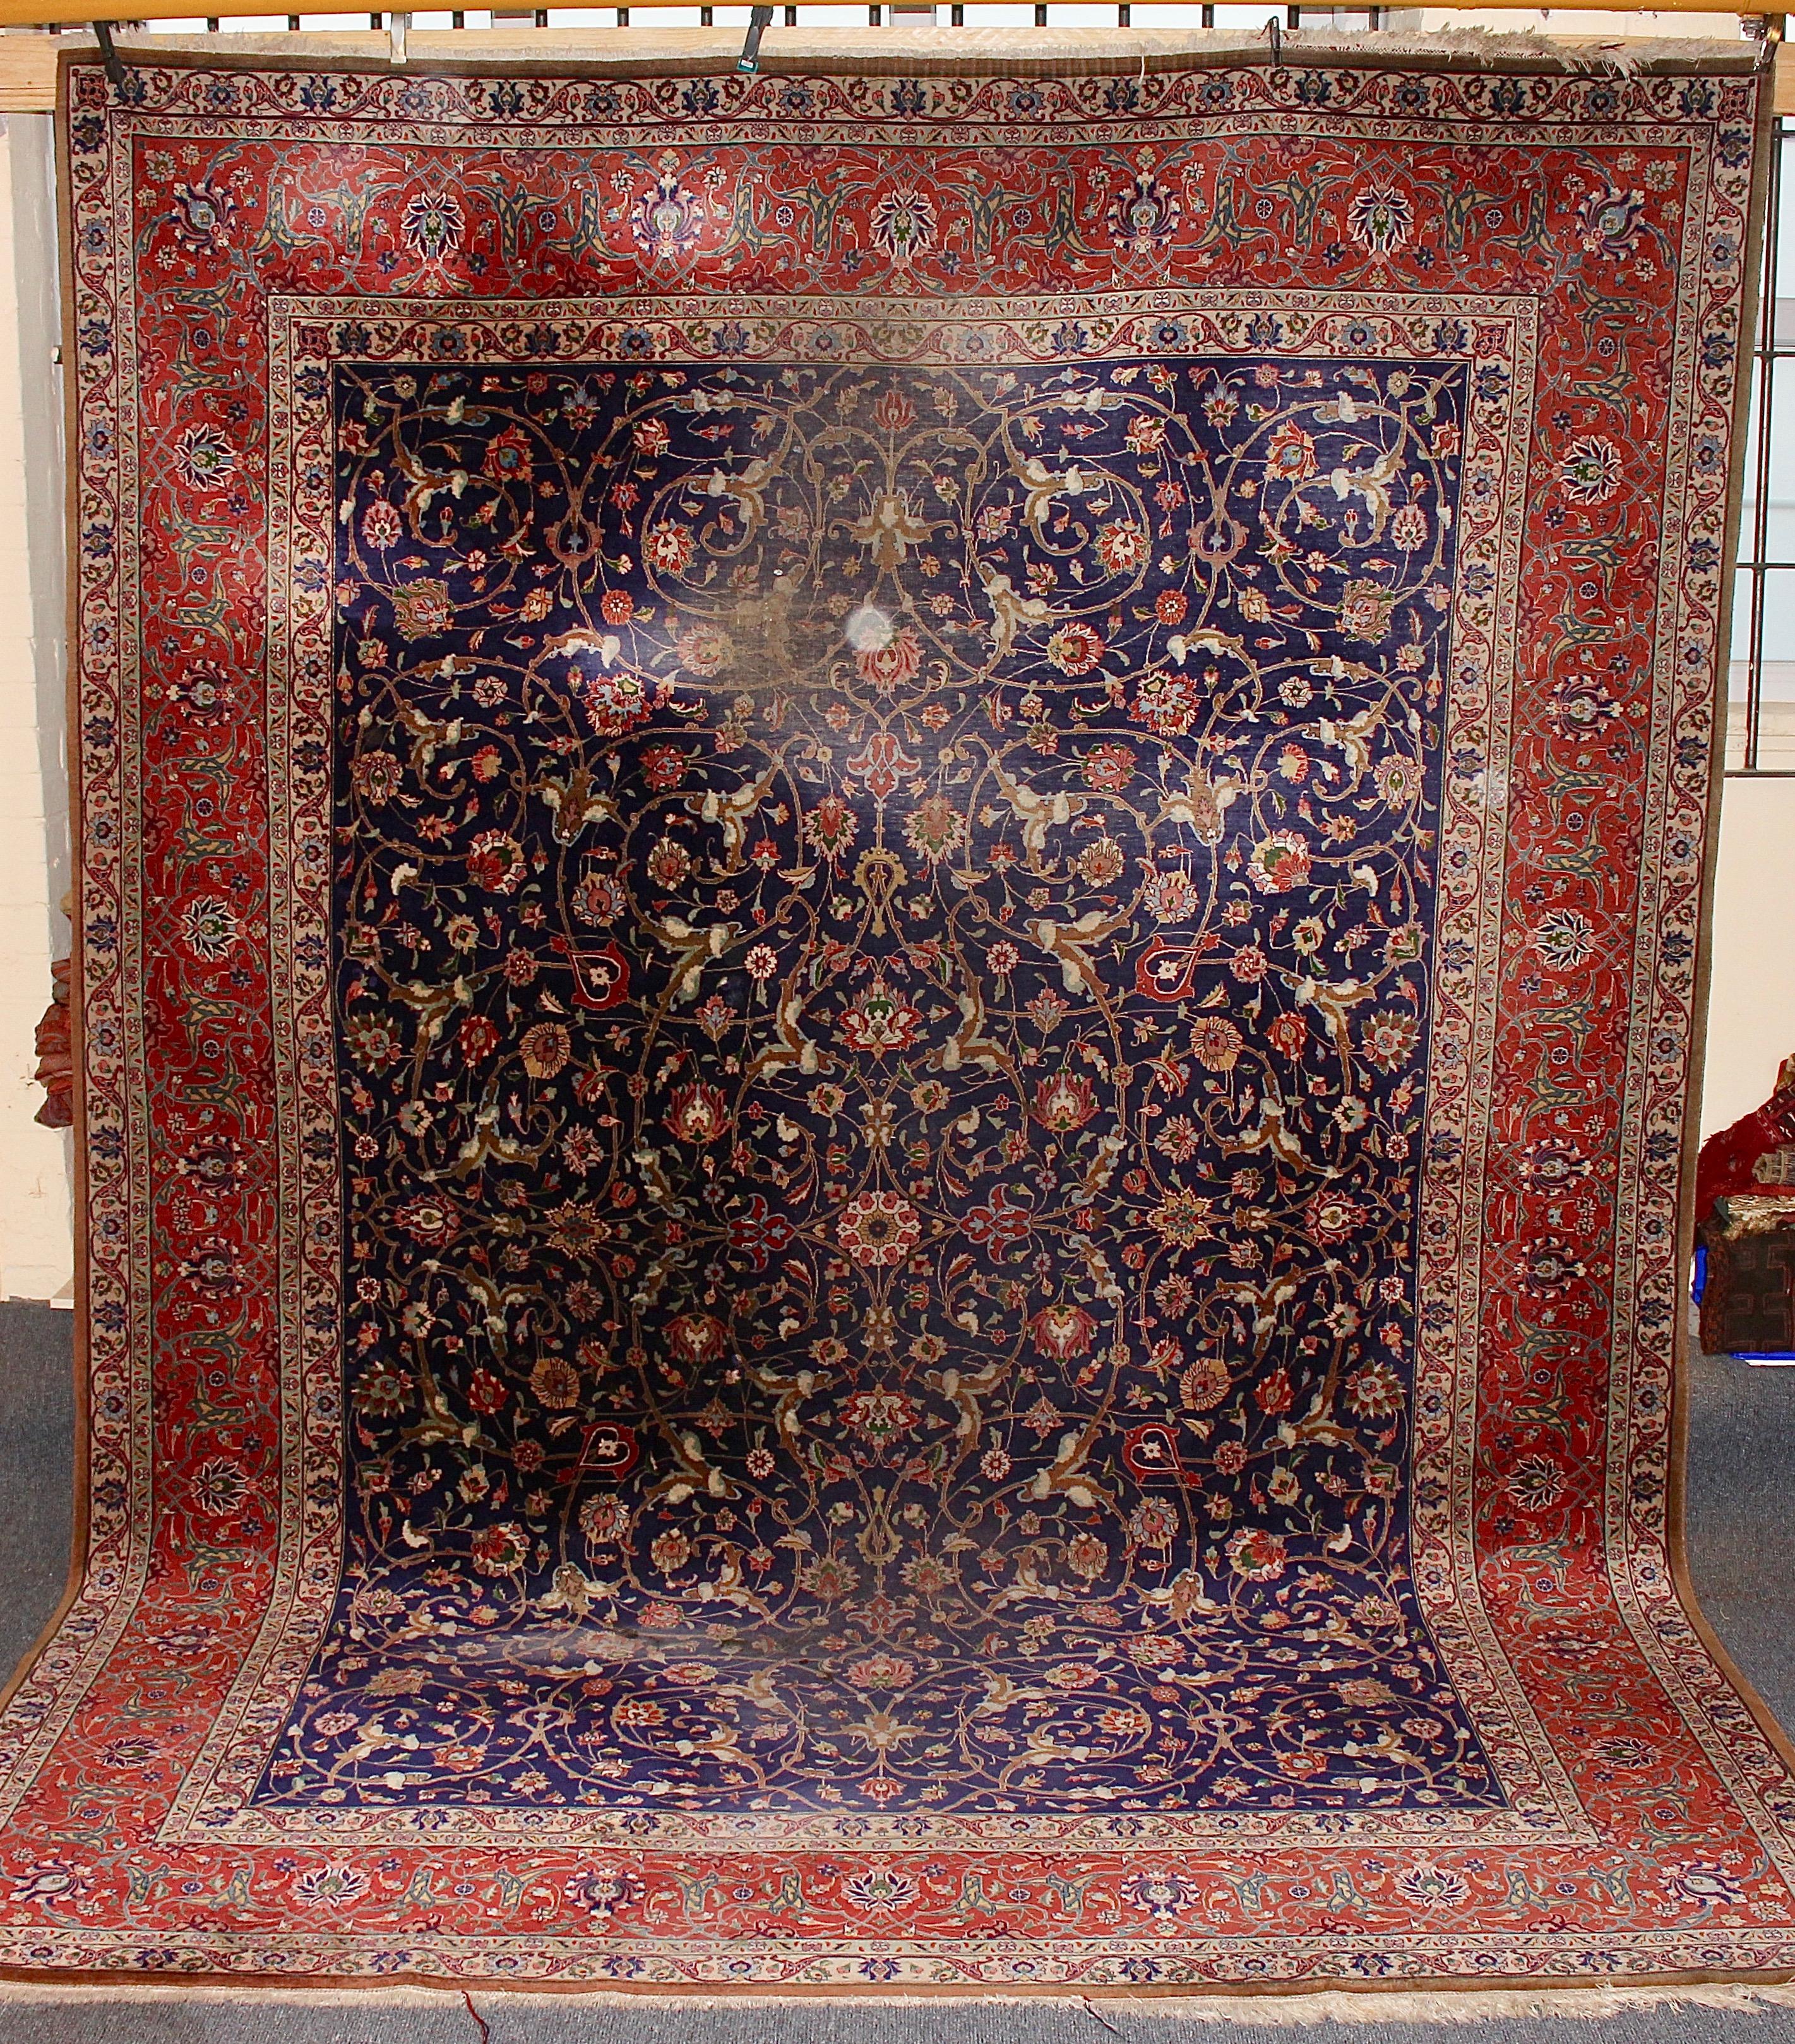 High quality, large antique orient rug. Carpet.

Hand knotted. Strong natural colors. Beautiful pattern.
The carpet is in an age-related condition.
Partly traces of wear.

The images are part of the article description.

On request, we clean